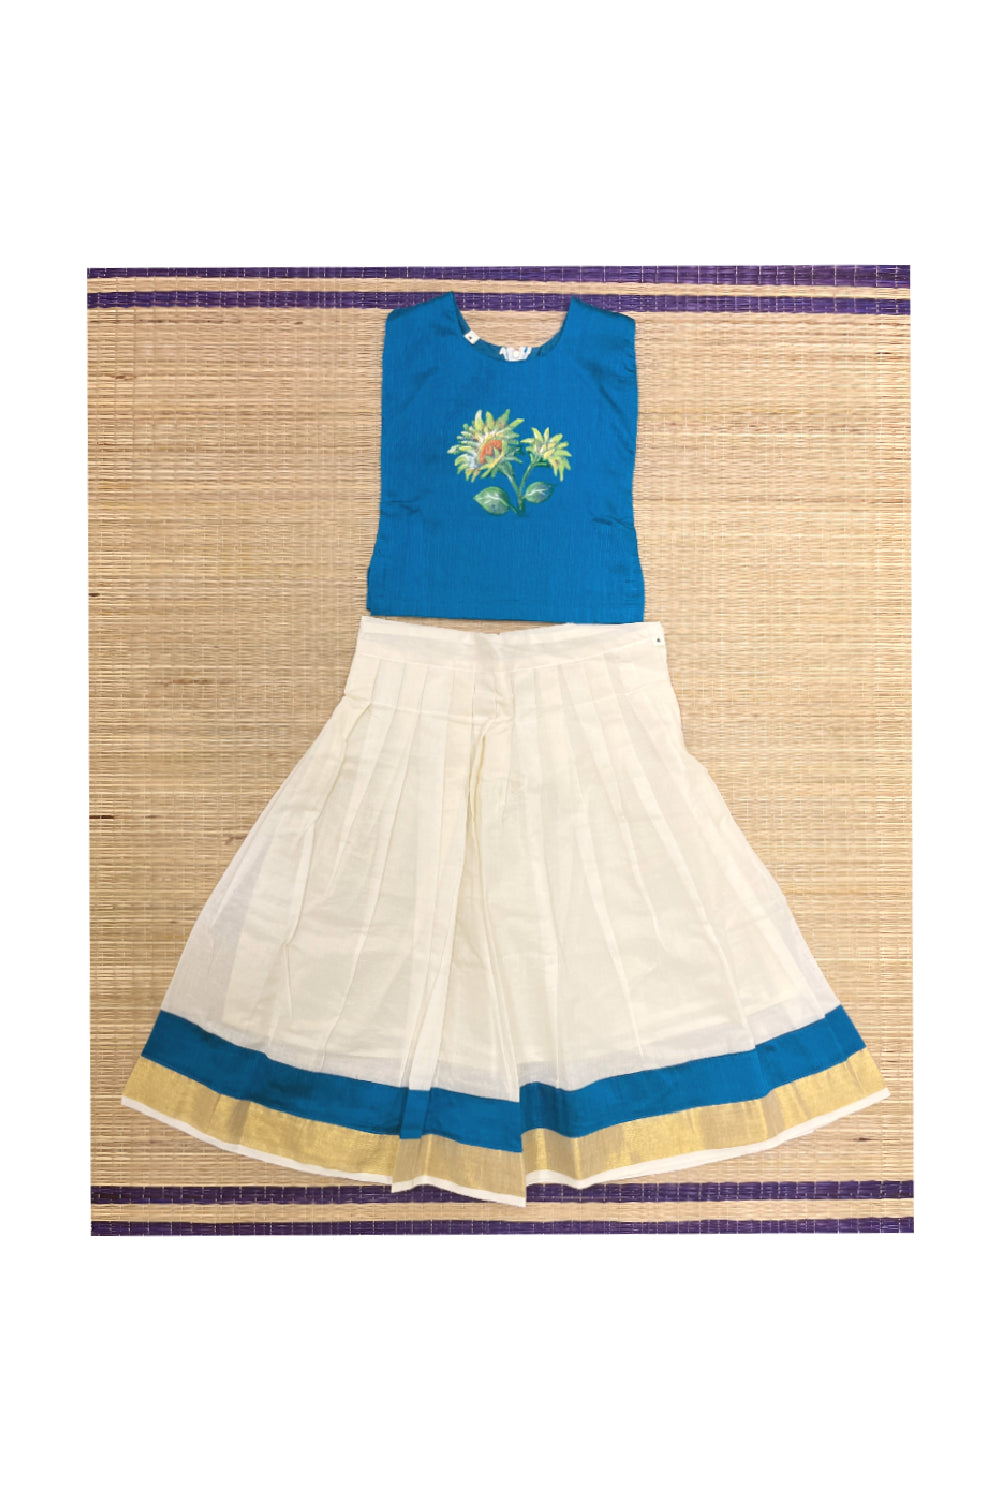 Southloom Kerala Pavada Blue Blouse with Floral Mural Designs (Age - 4 Years)